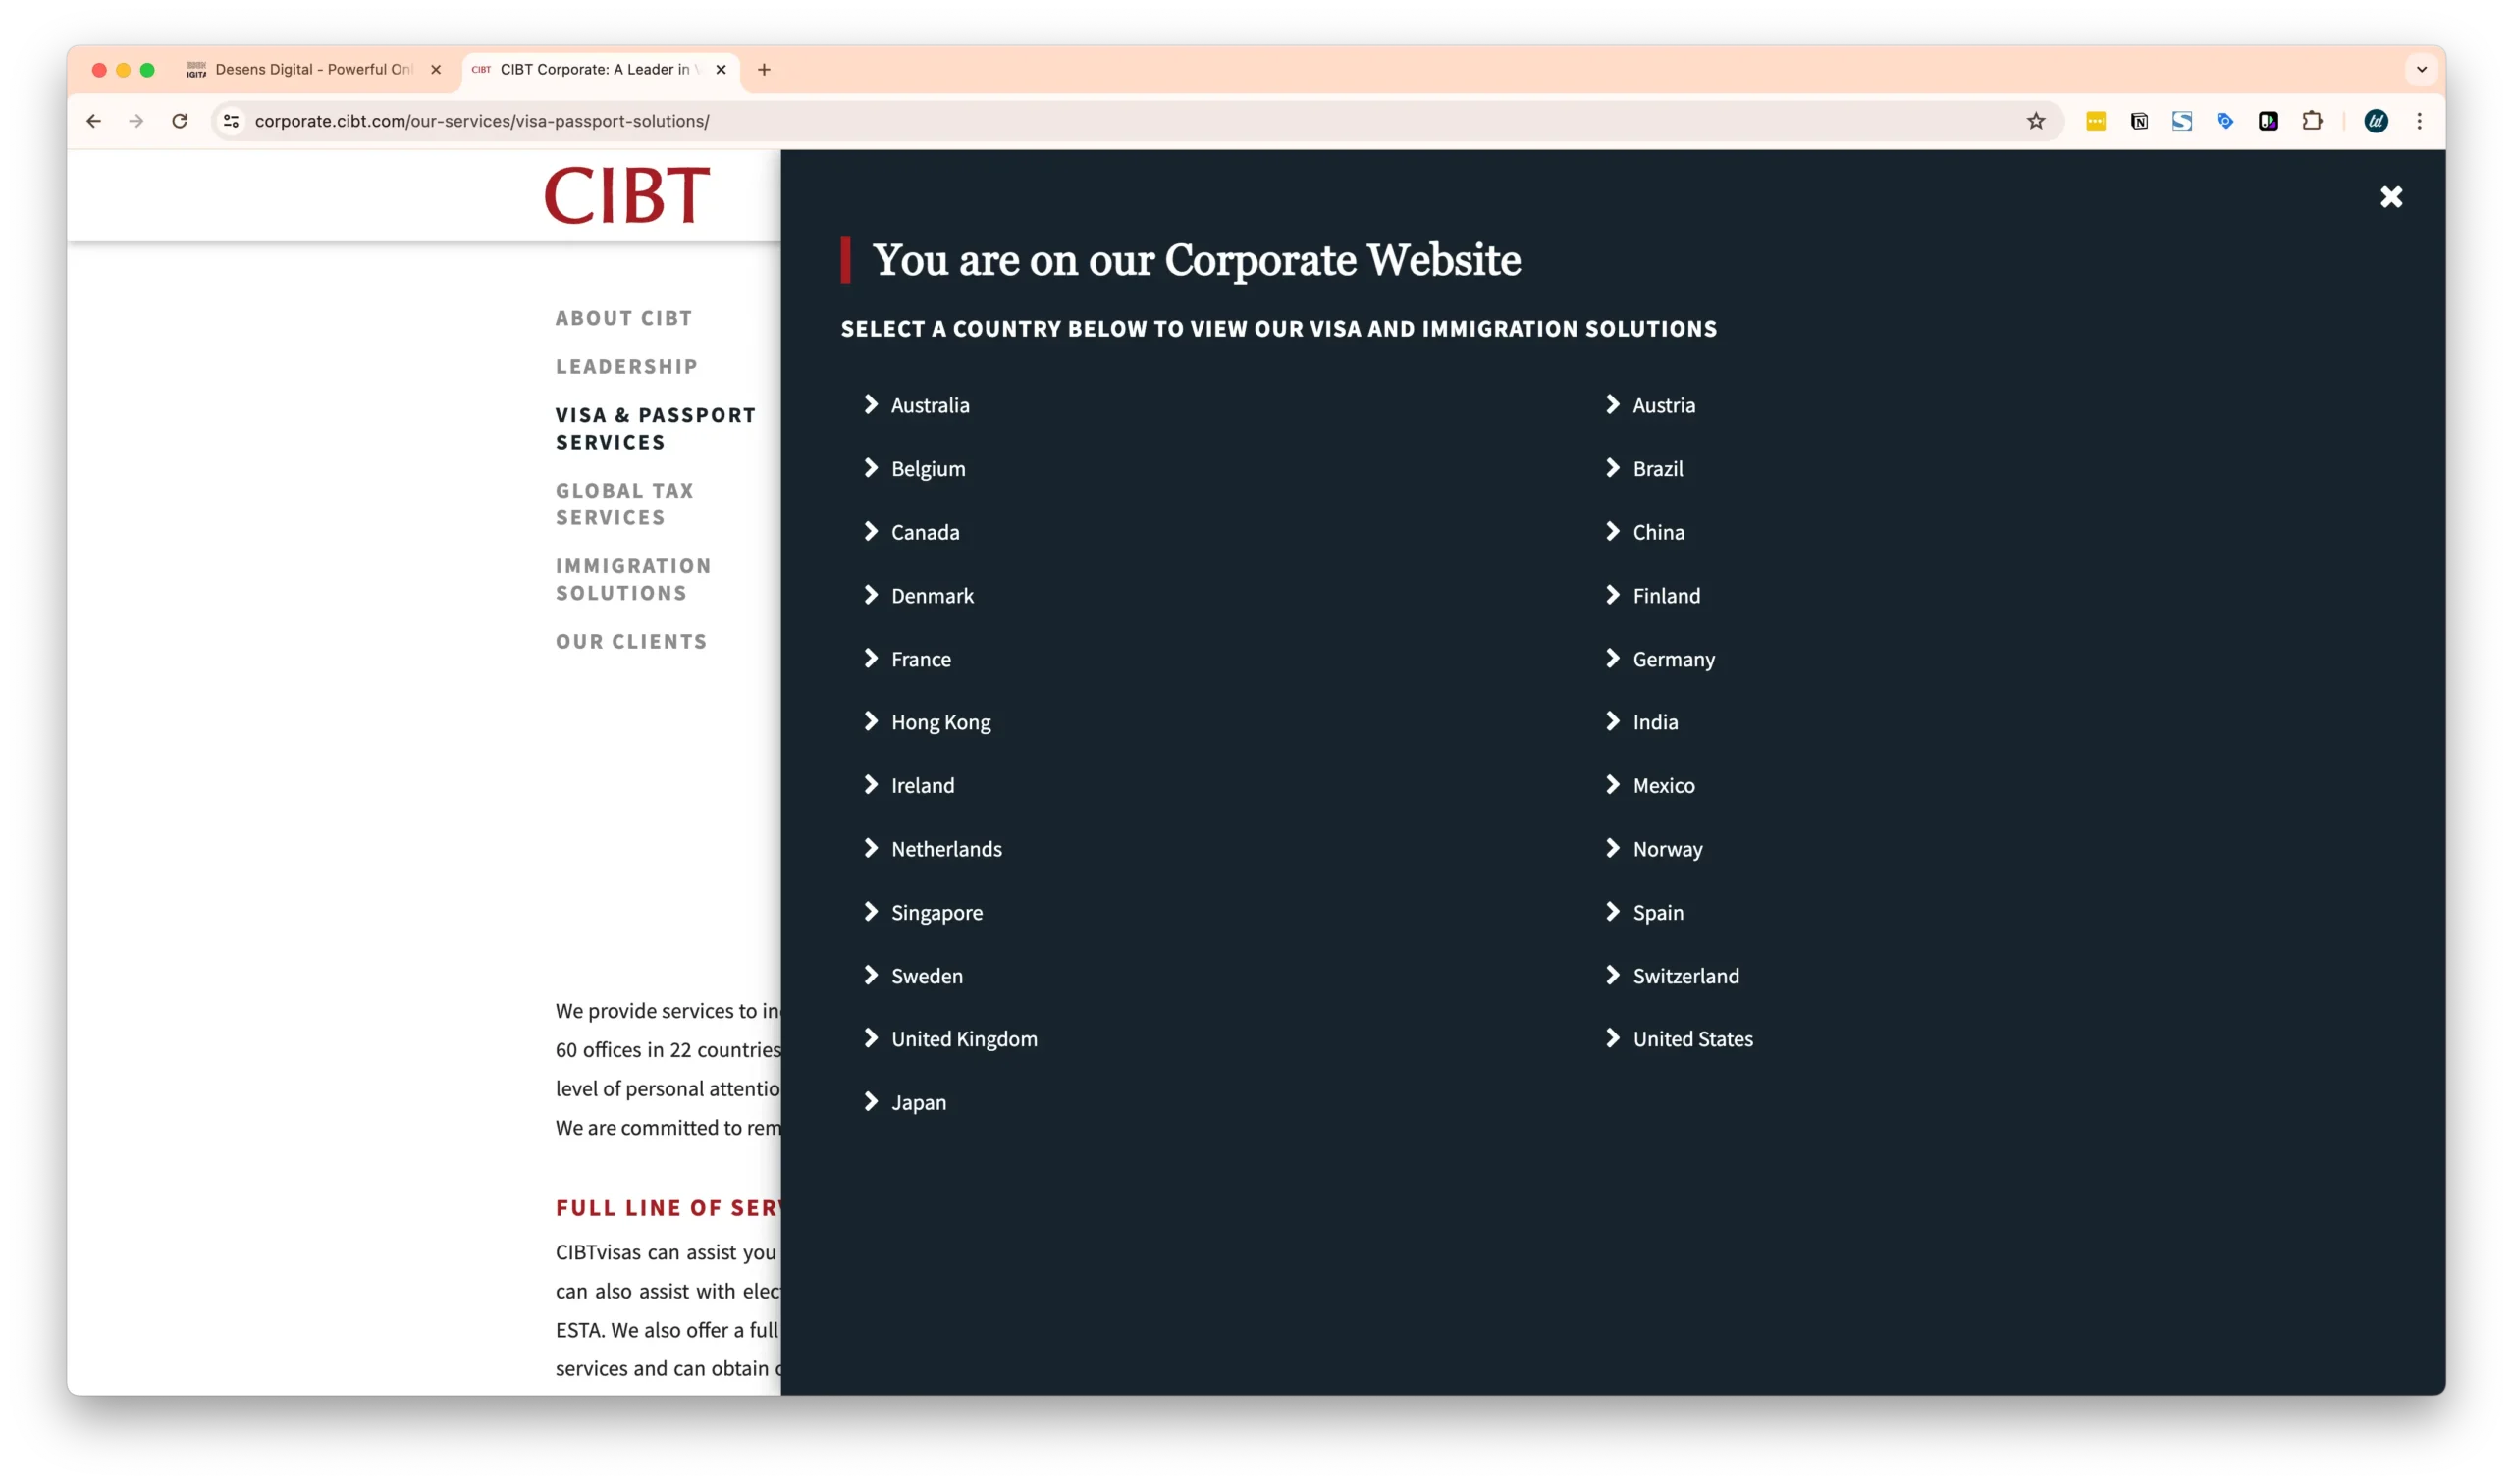 A webpage displaying a list of countries for visa and immigration solutions offered by CIBT. The navigation menu includes options for leadership, visa and passport services, global tax services, and immigration solutions.